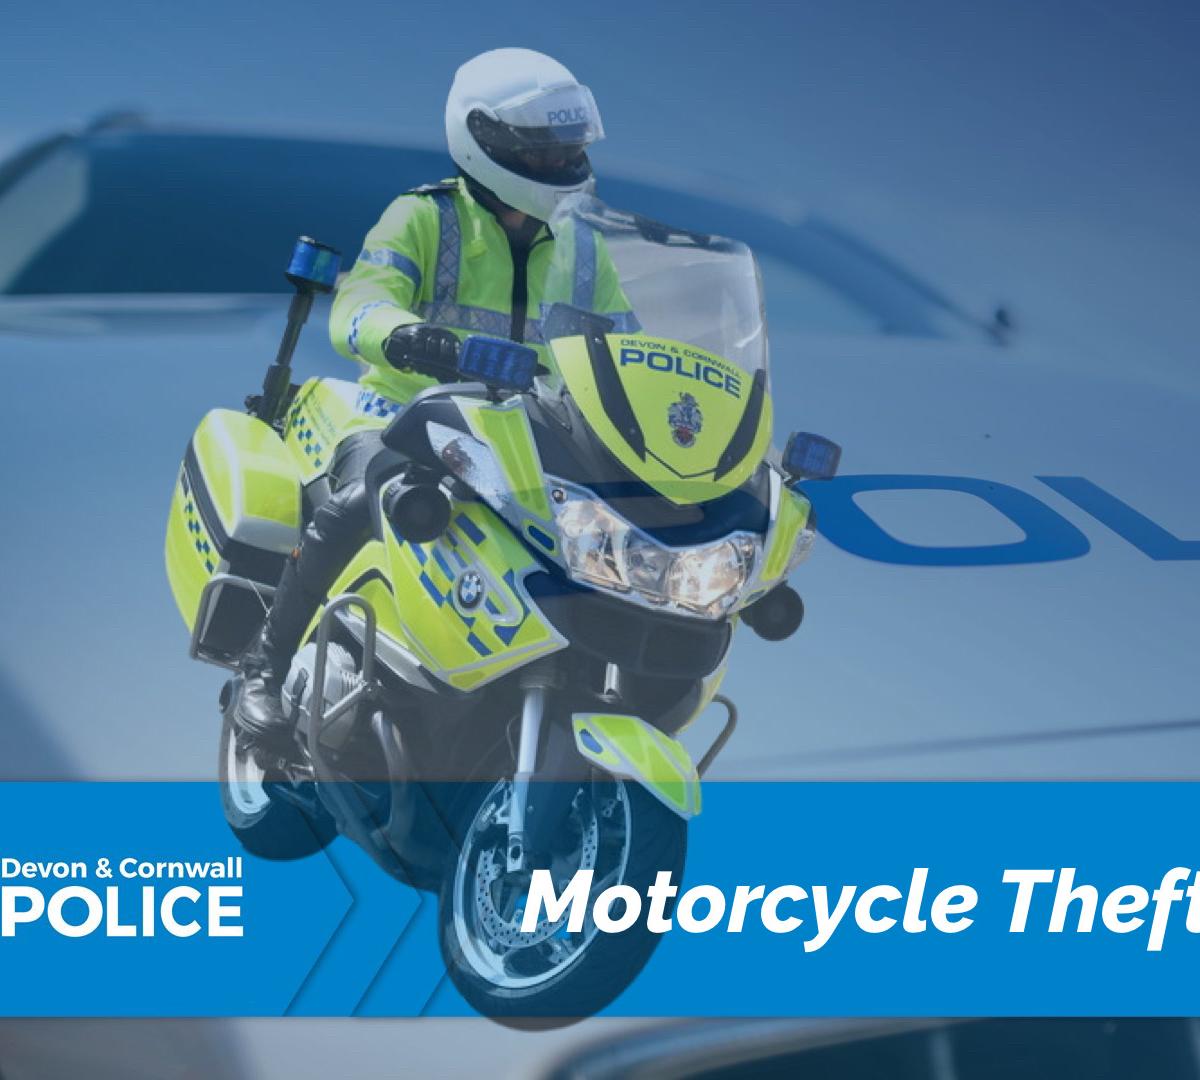 You are currently viewing Lock up your motorbike police warn after a series of thefts in Newton Abbot